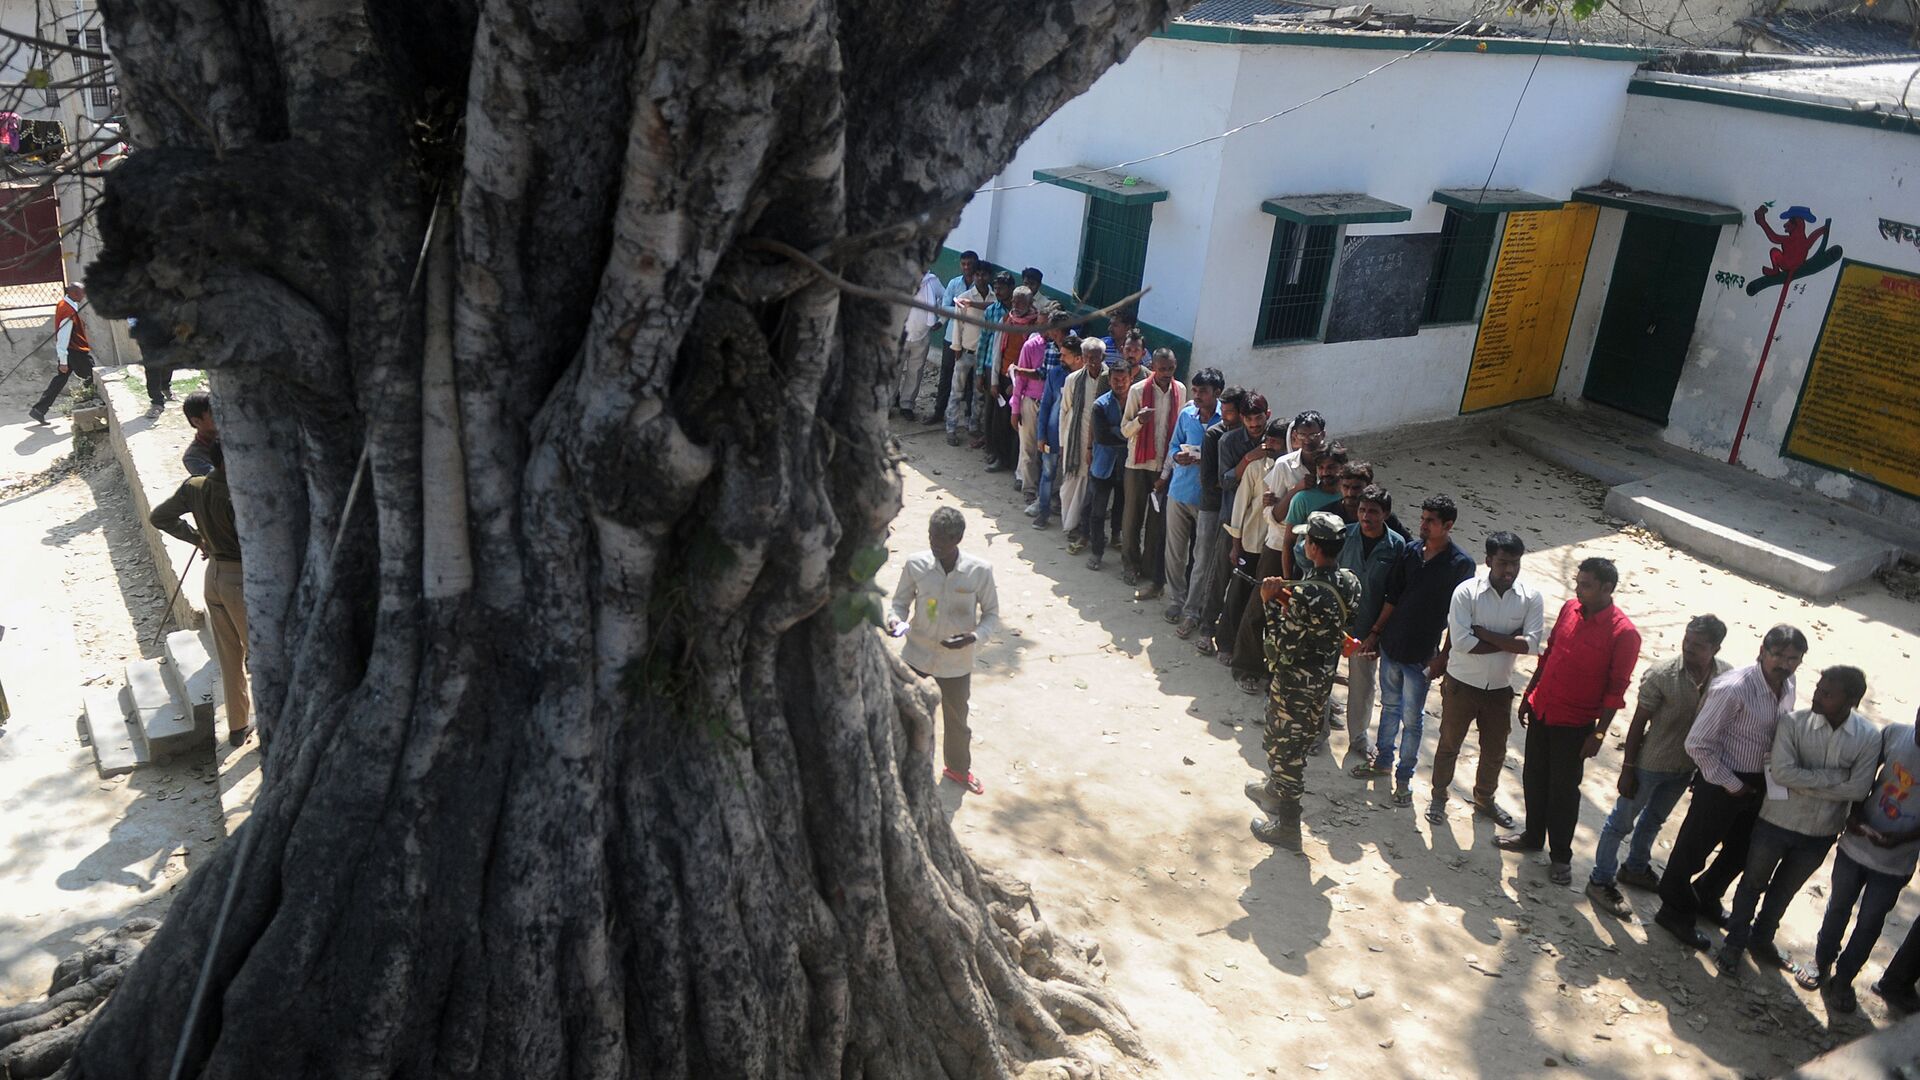 Indian voters wait in a queue for their turn to vote at a polling station in the Naini area on the outskirts of Allahabad during the fourth phase of Uttar Pradesh state assembly elections on February 23, 2017 - Sputnik International, 1920, 04.09.2021